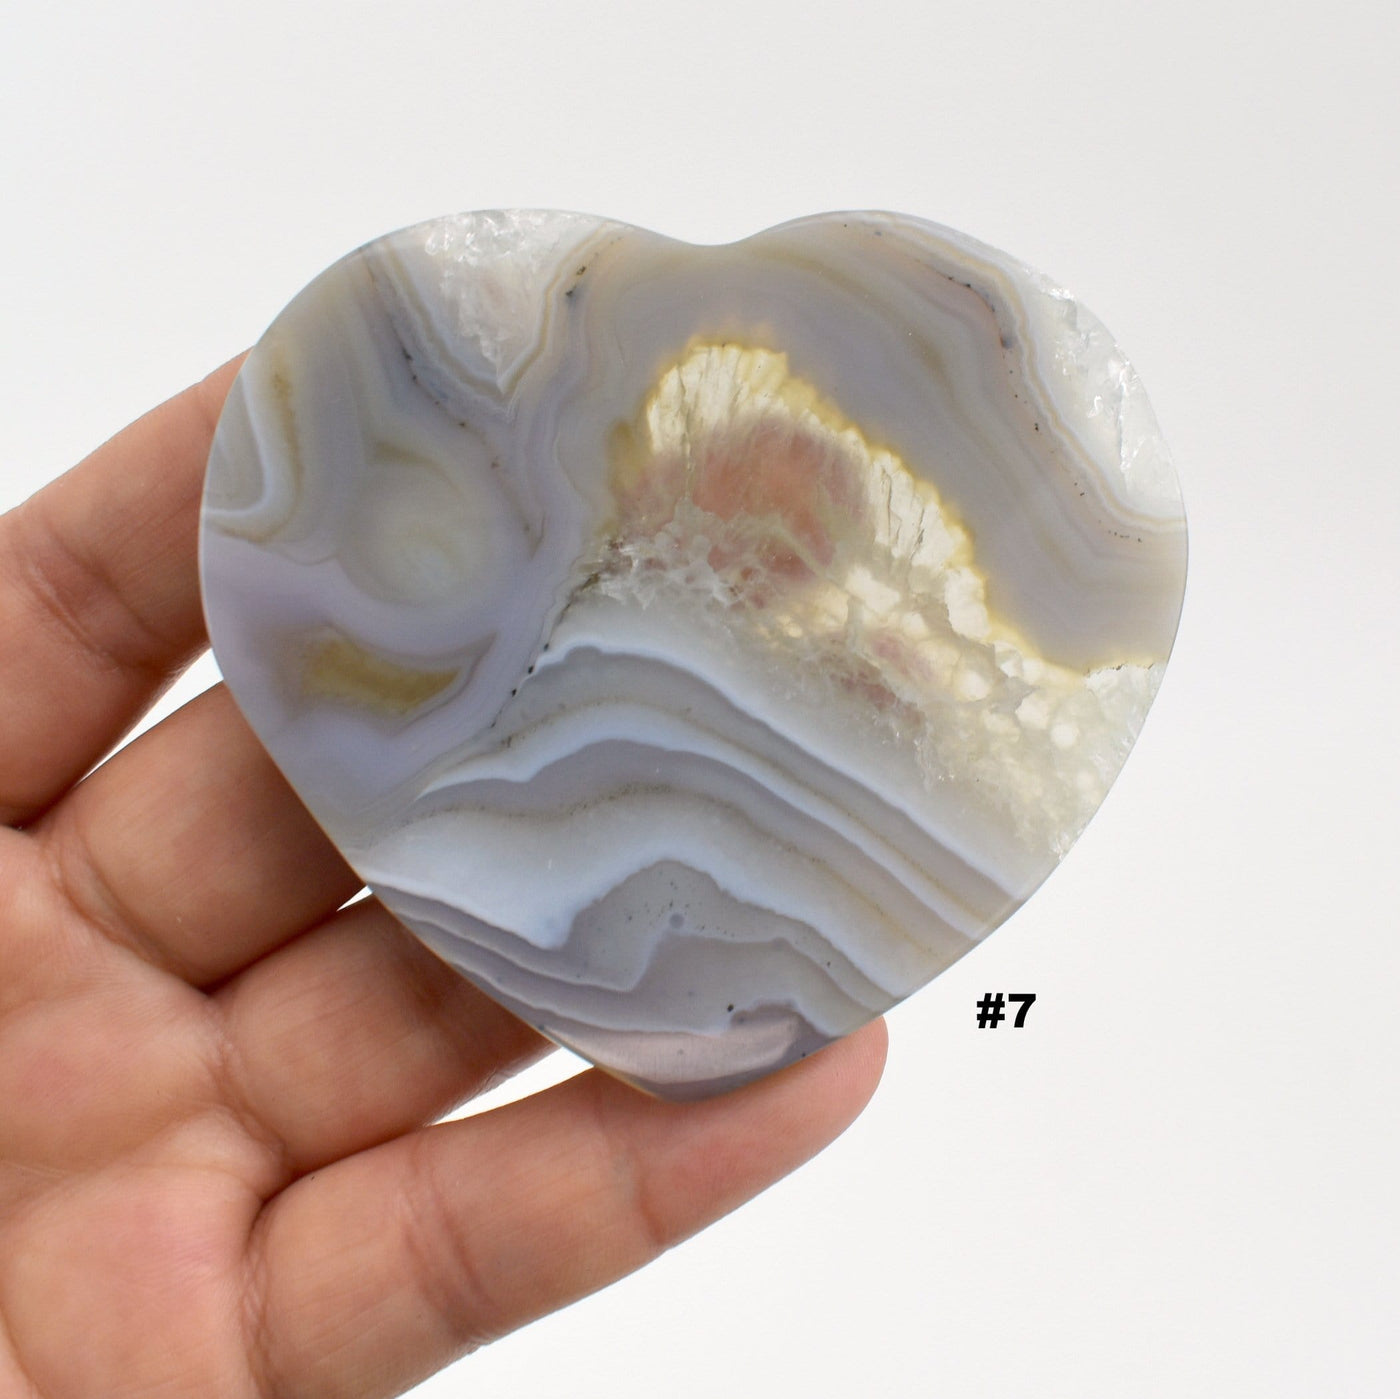 Agate heart slice #7 in a hand with a white background.